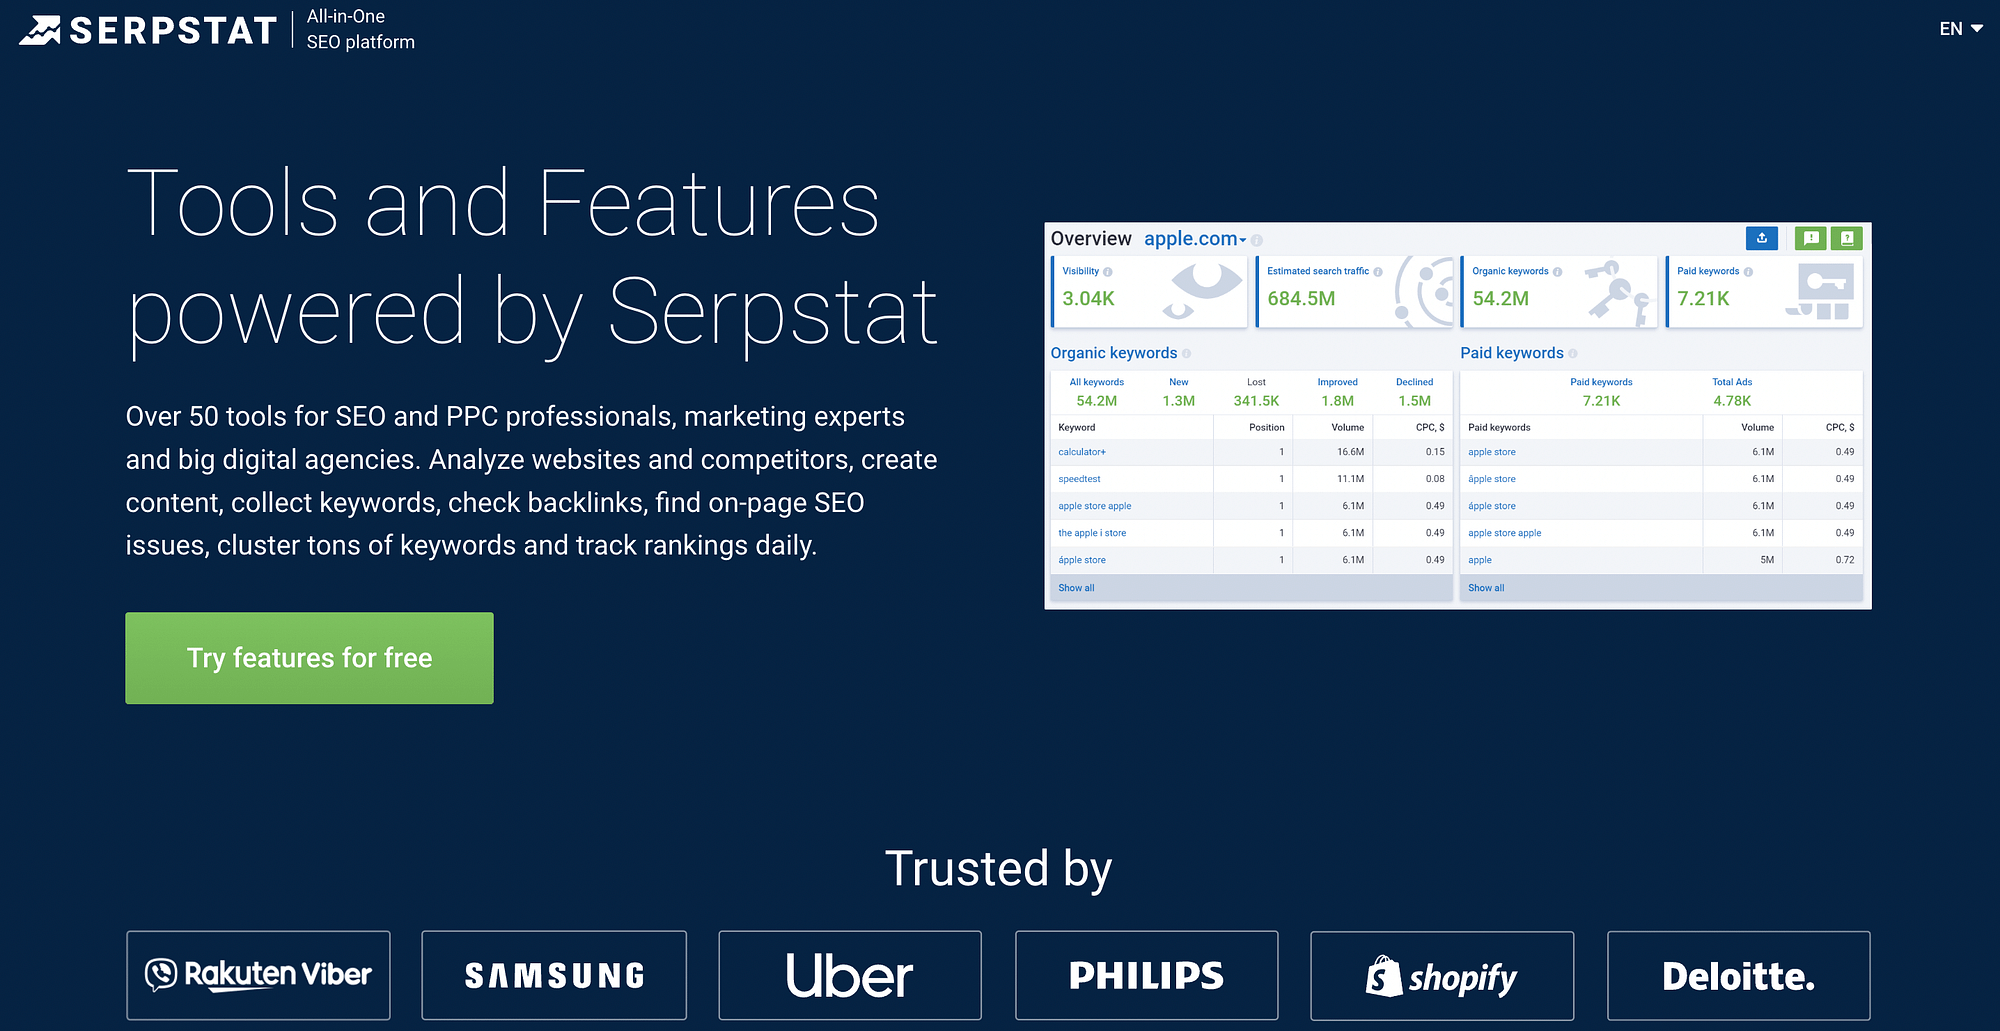 Serpstat features